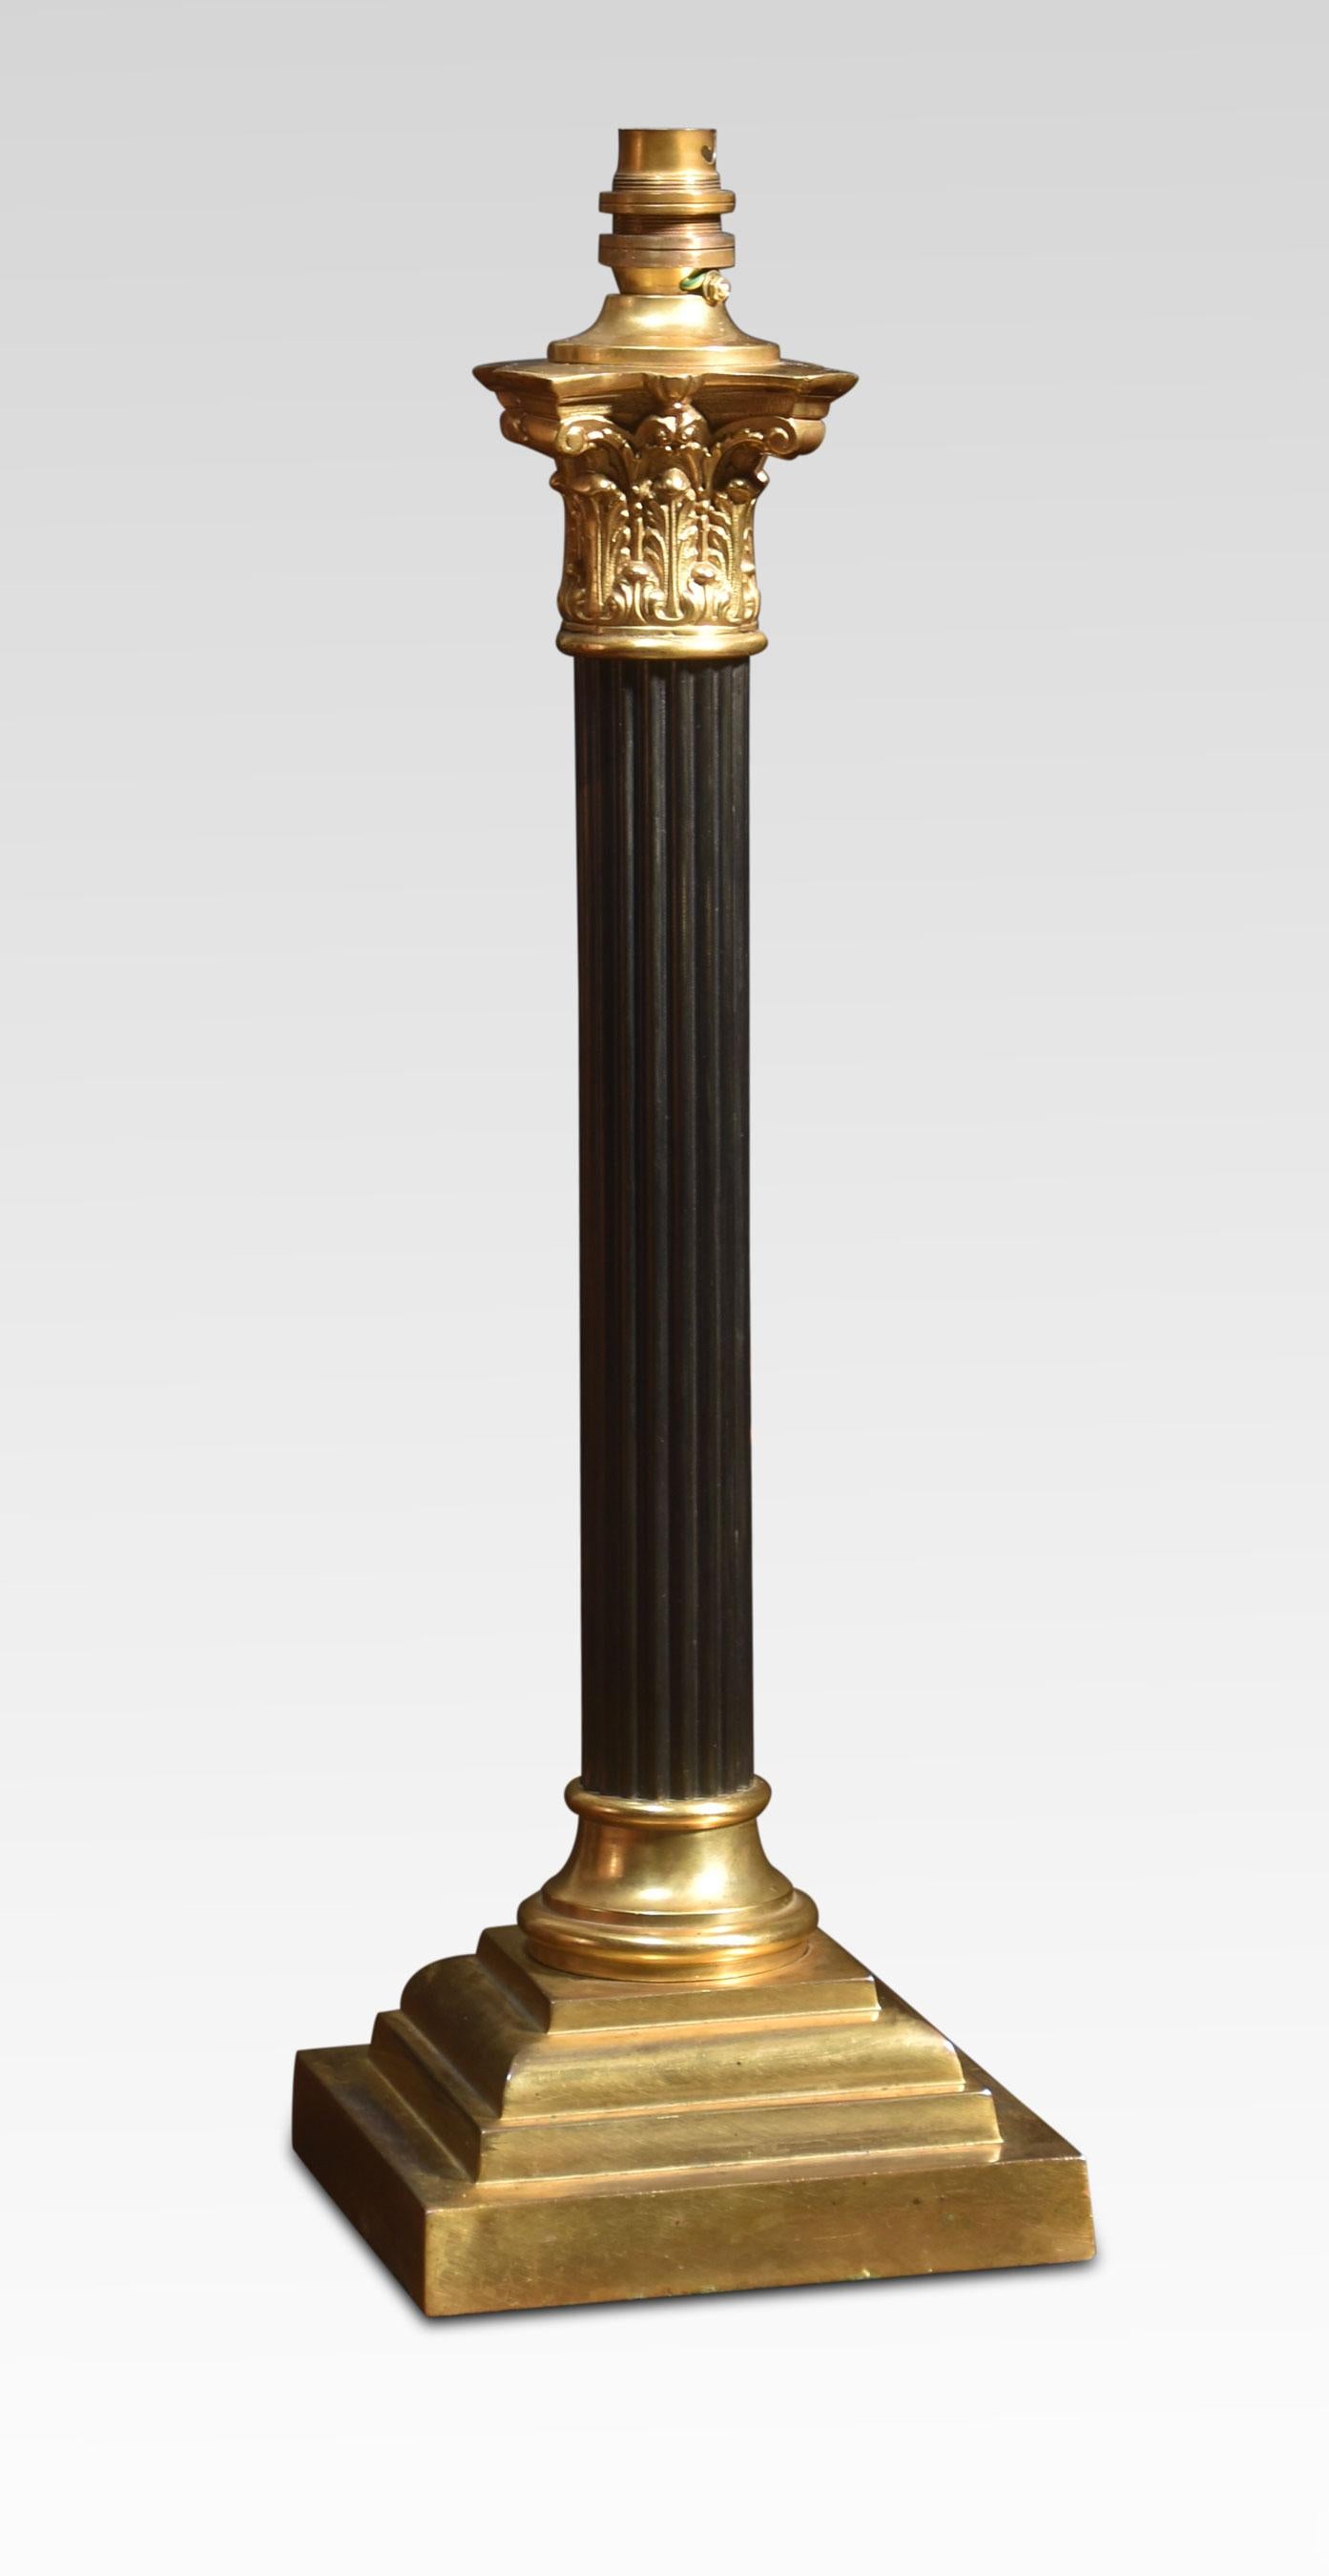 Brass table lamp, having a Corinthian column on a stepped square base. The lamp has been rewired and tested.
Dimensions
Height 20.5 Inches
Width 6.5 Inches
Depth 6.5 Inches